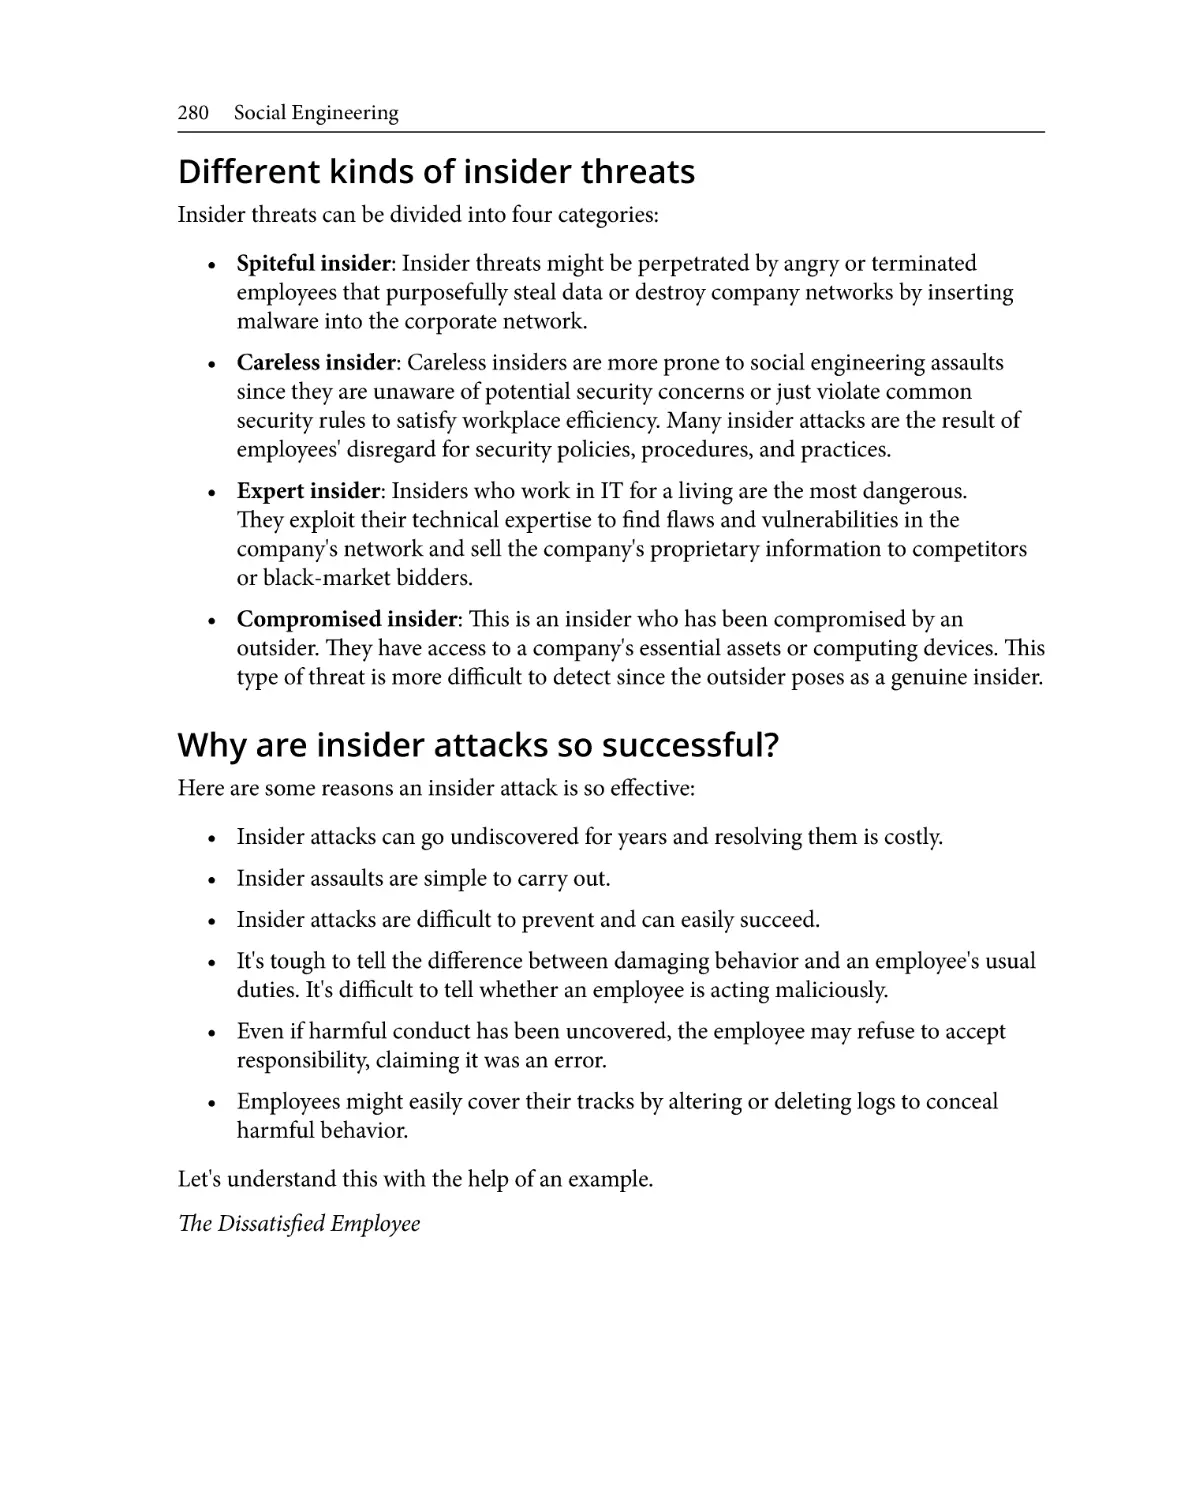 Different kinds of insider threats
Why are insider attacks so successful?